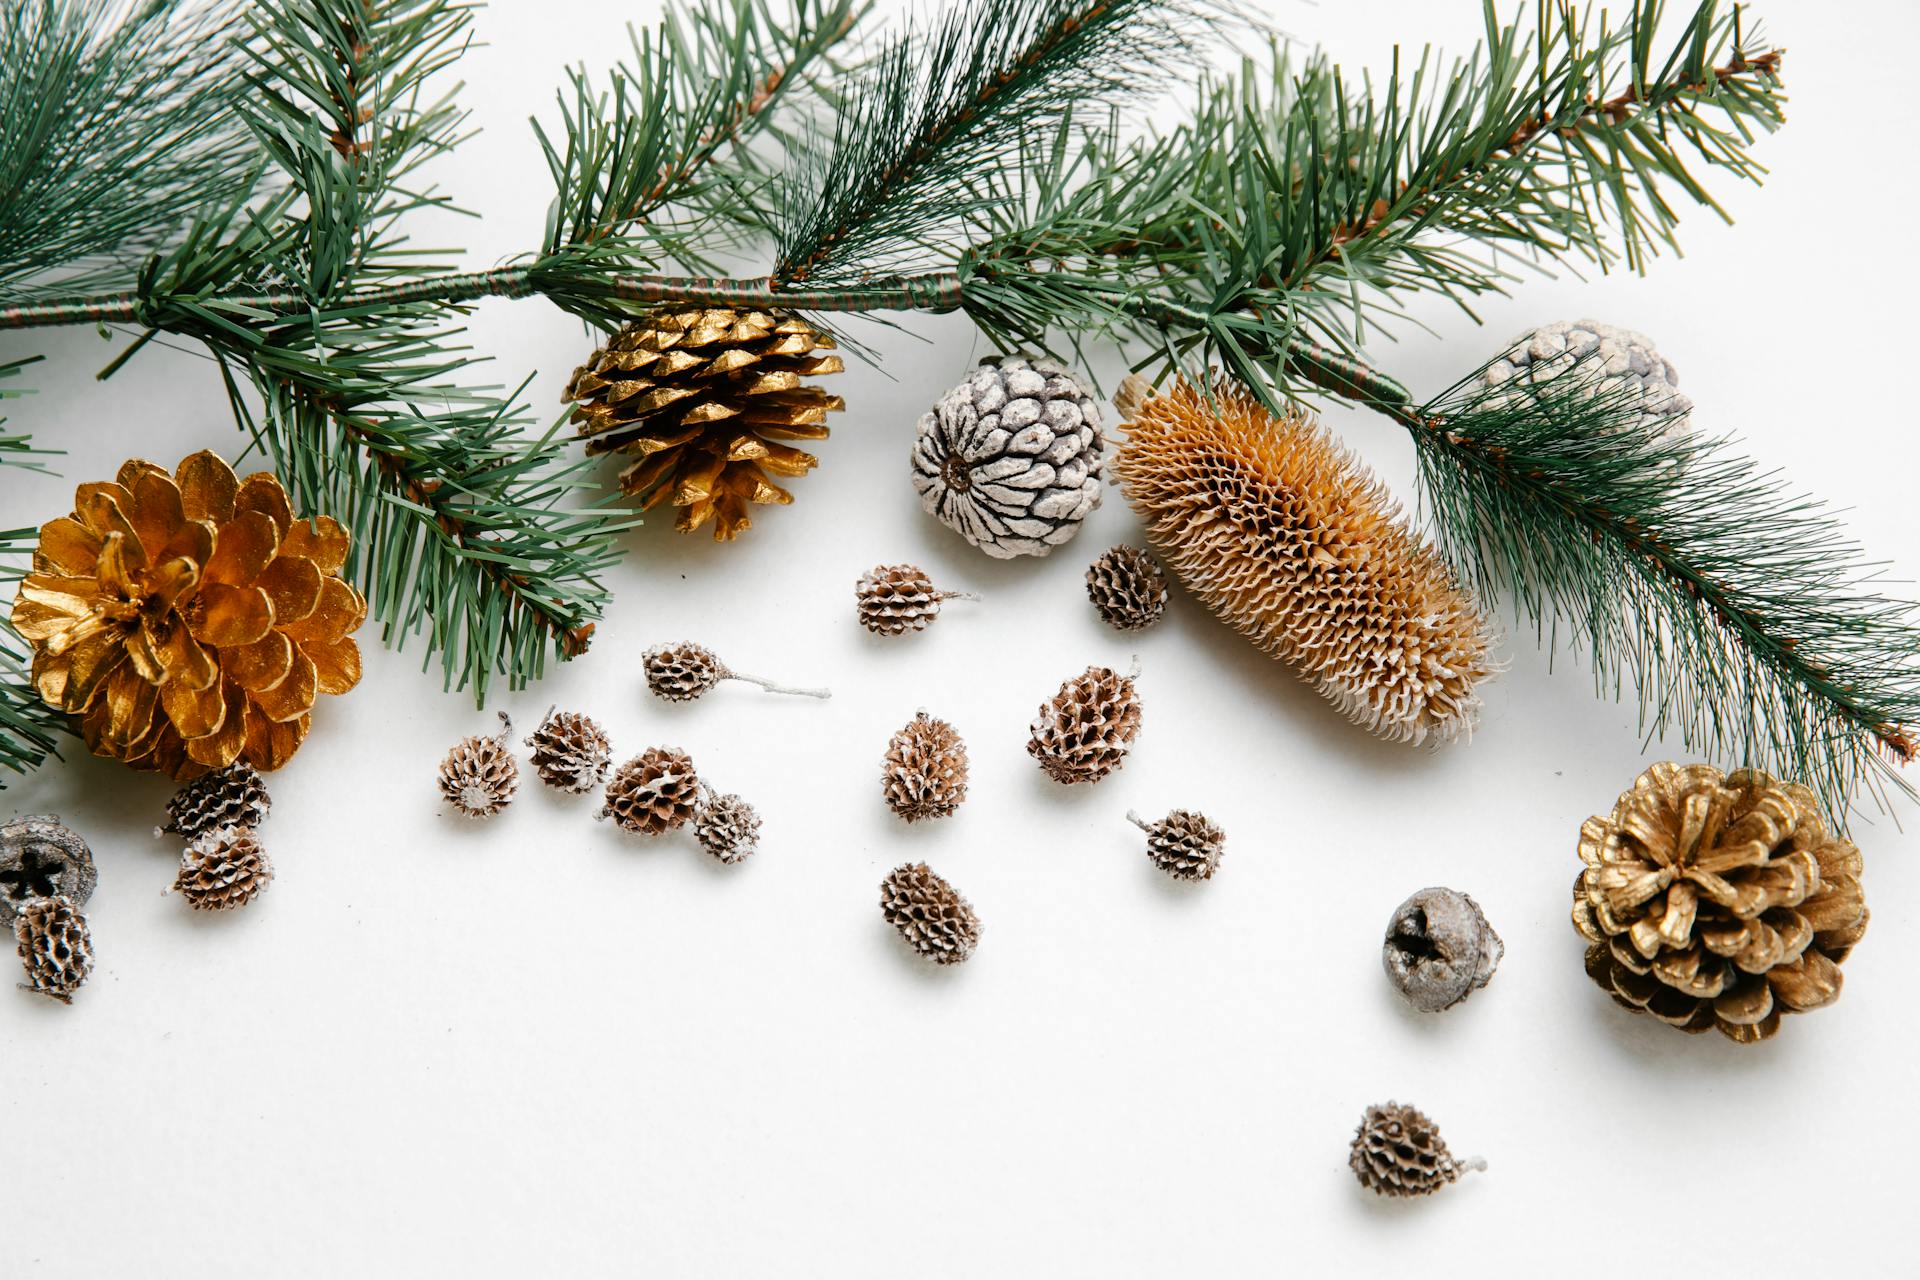 Collection of pine and spruce cones on white background